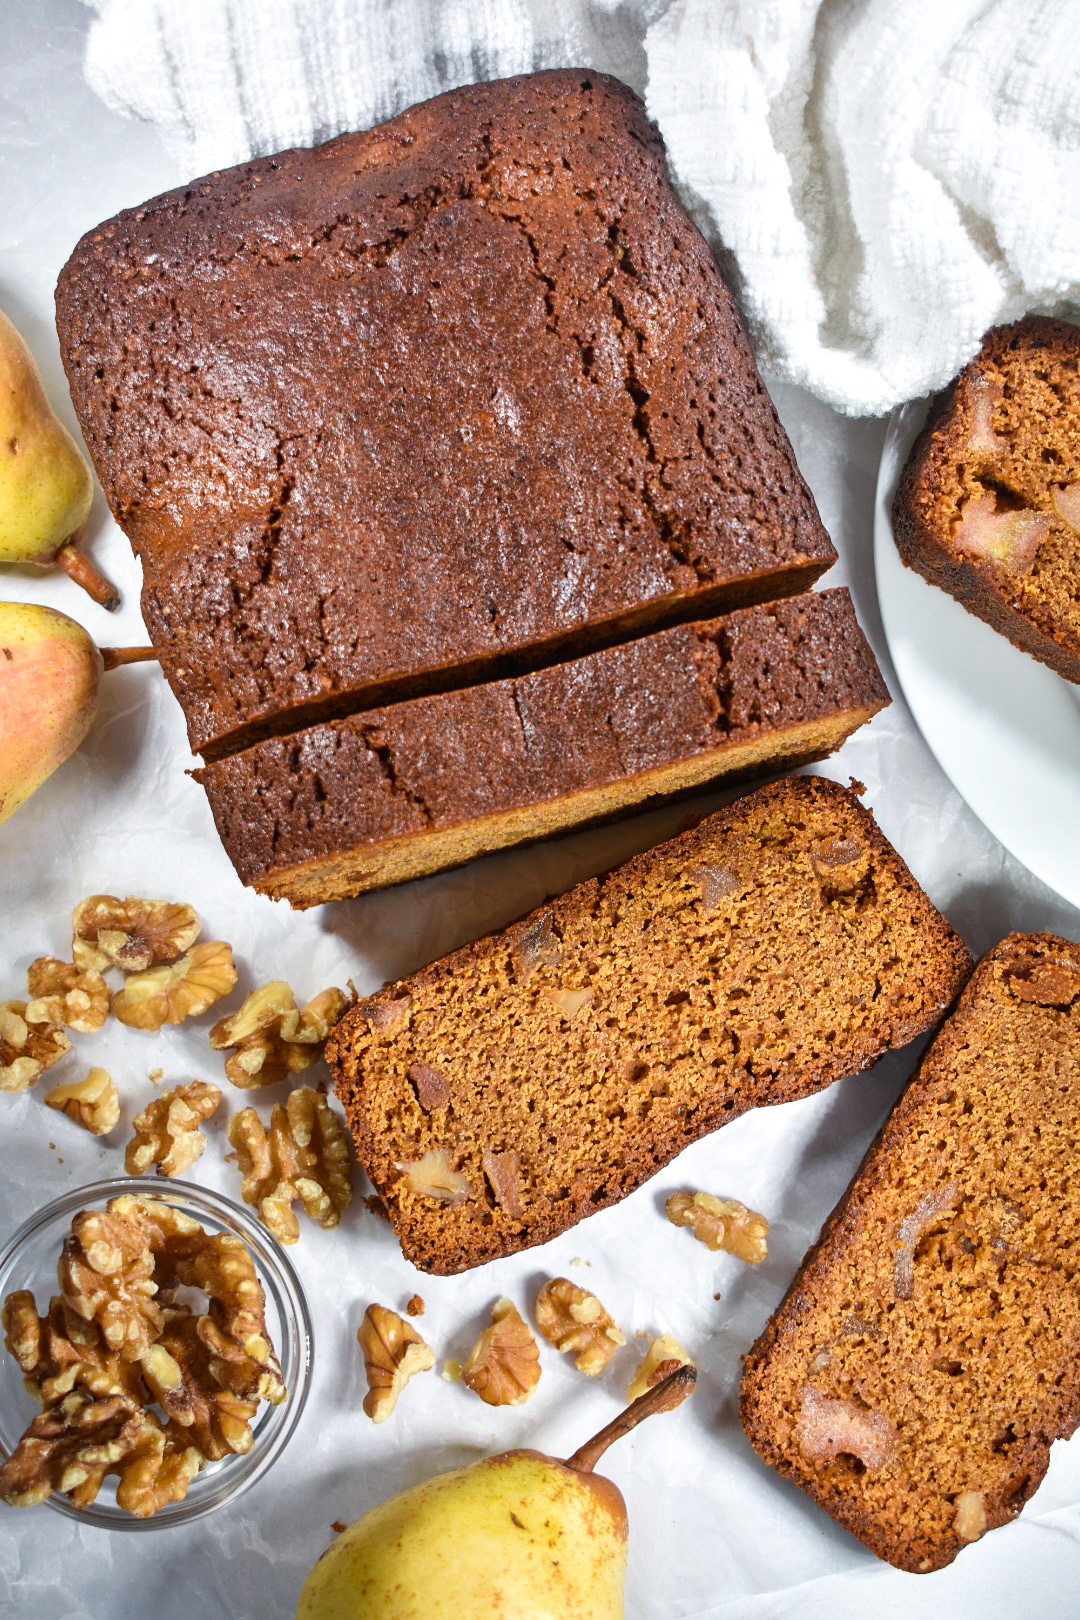 Gingerbread loaf with slices cut, on a white background with whole pears and a bowl of walnuts